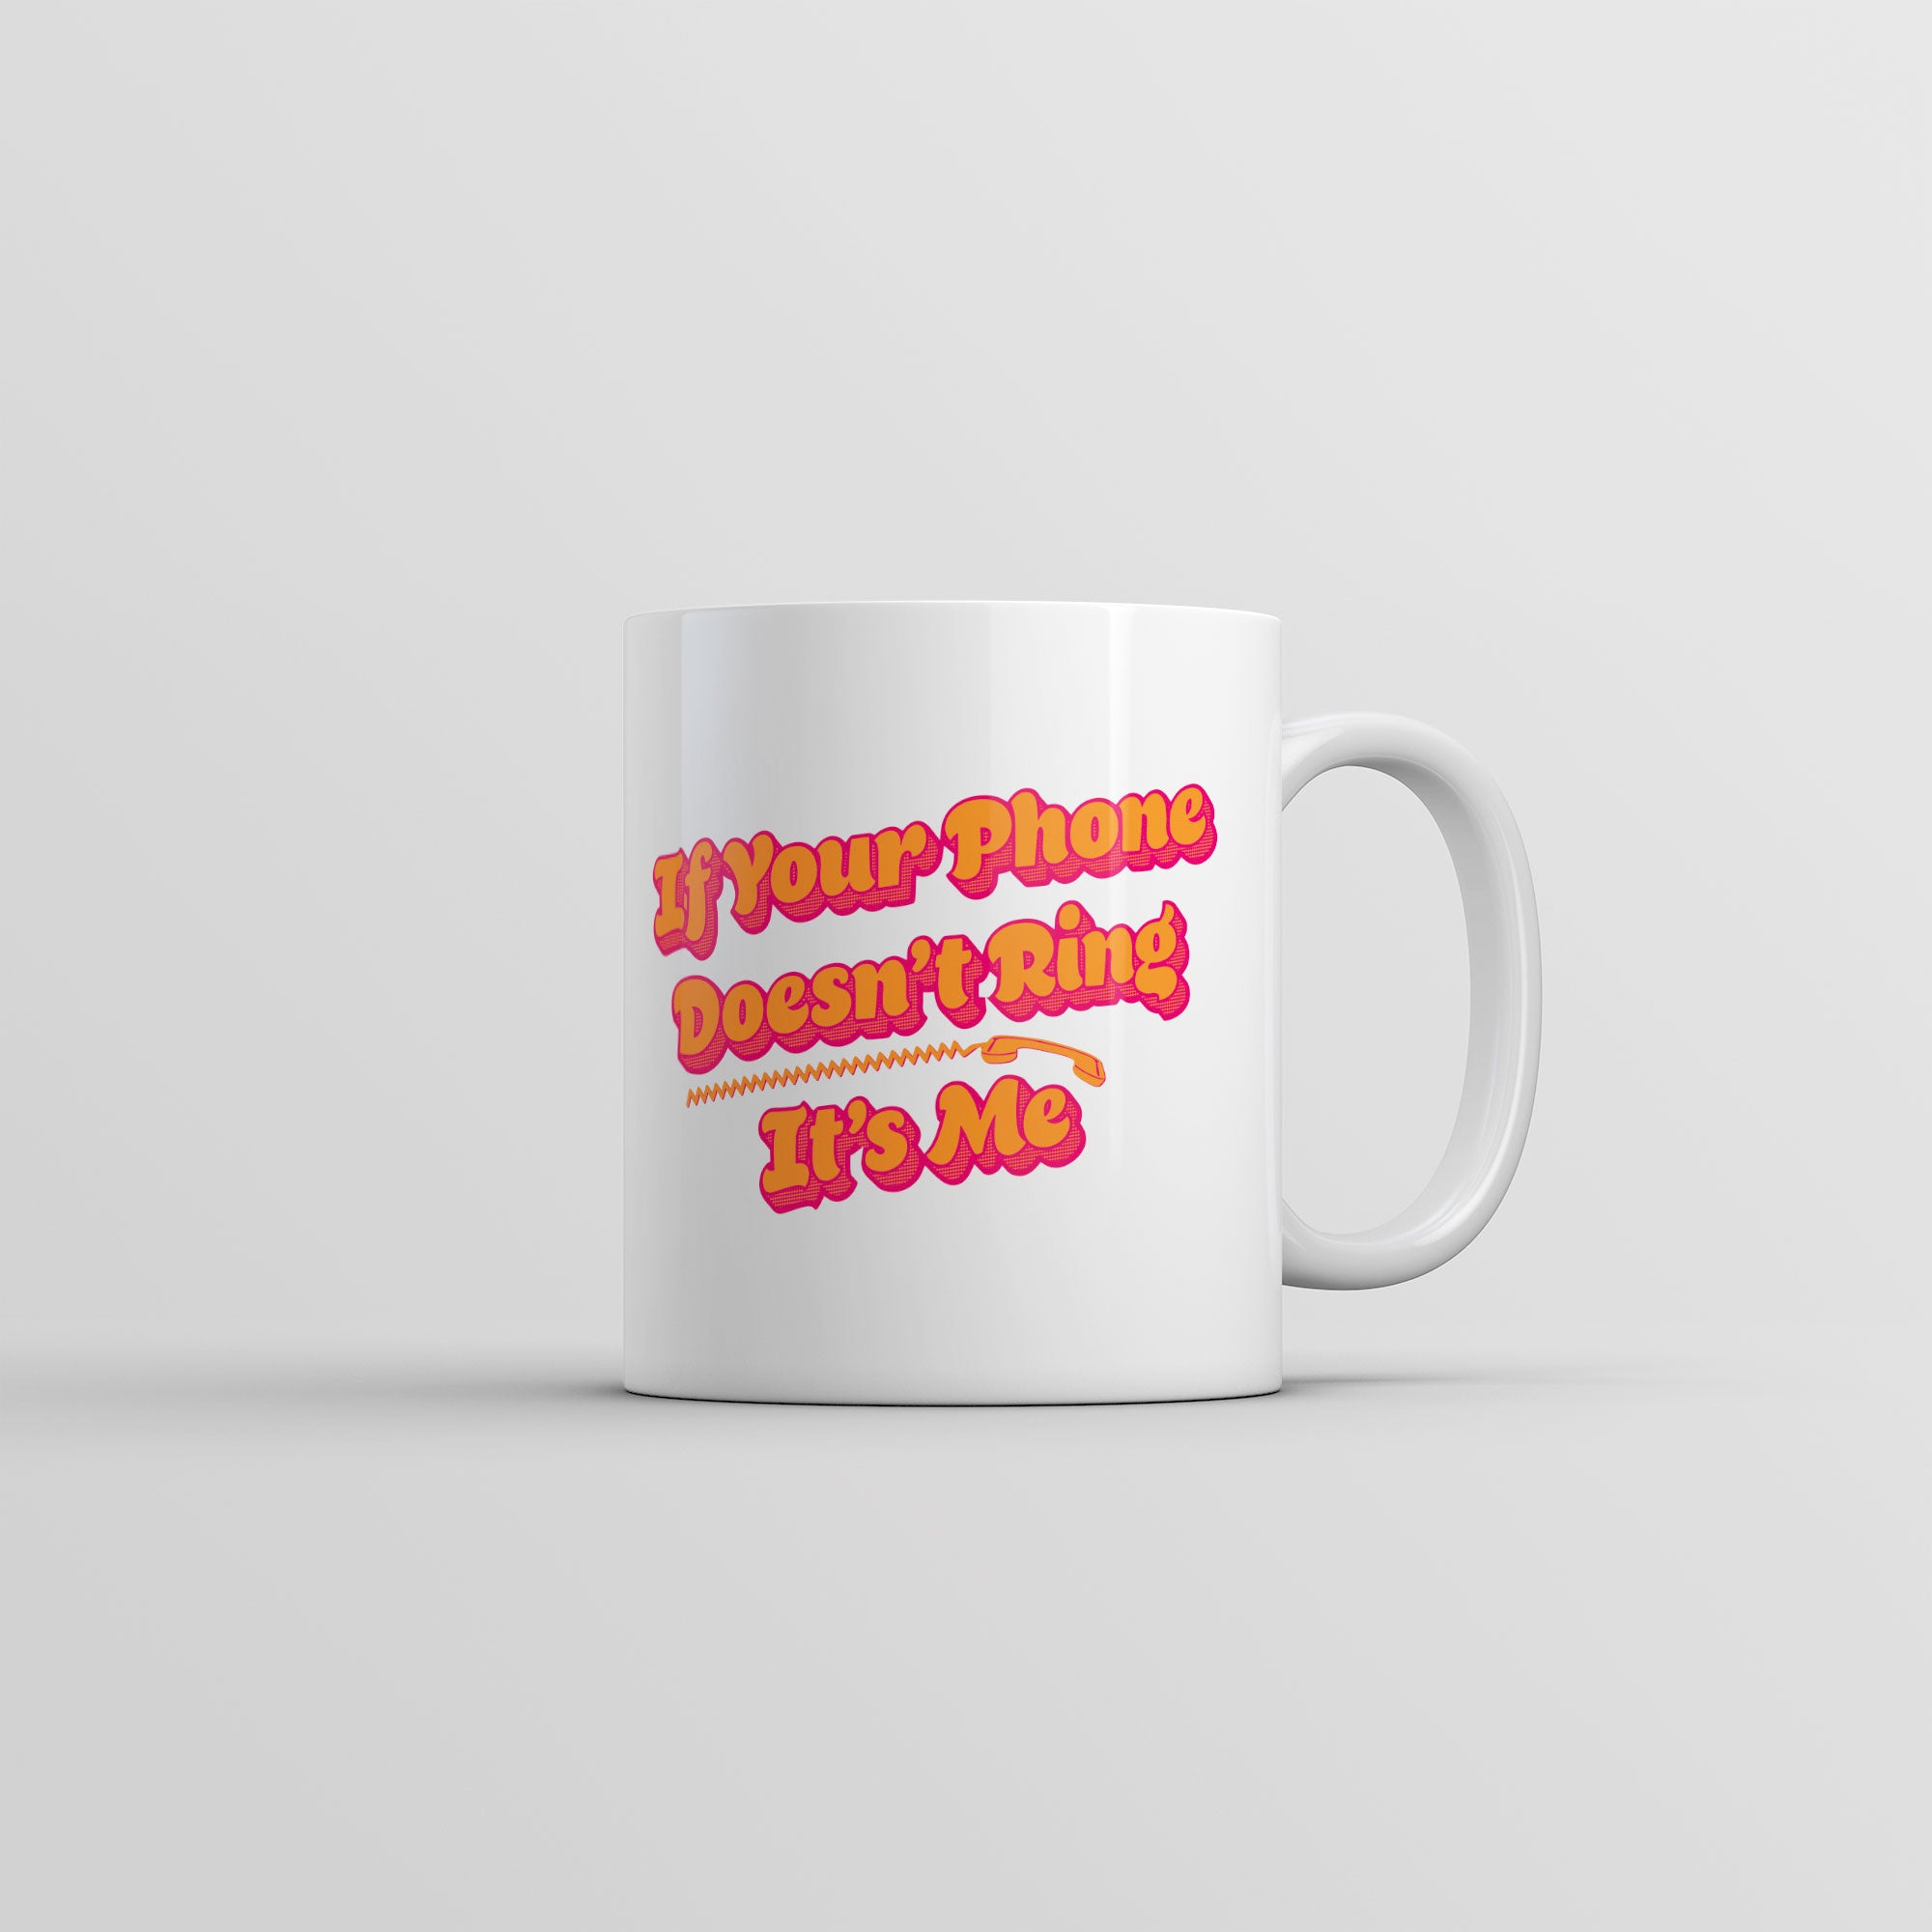 Funny White If Your Phone Doesnt Ring Its Me Coffee Mug Nerdy Sarcastic Tee